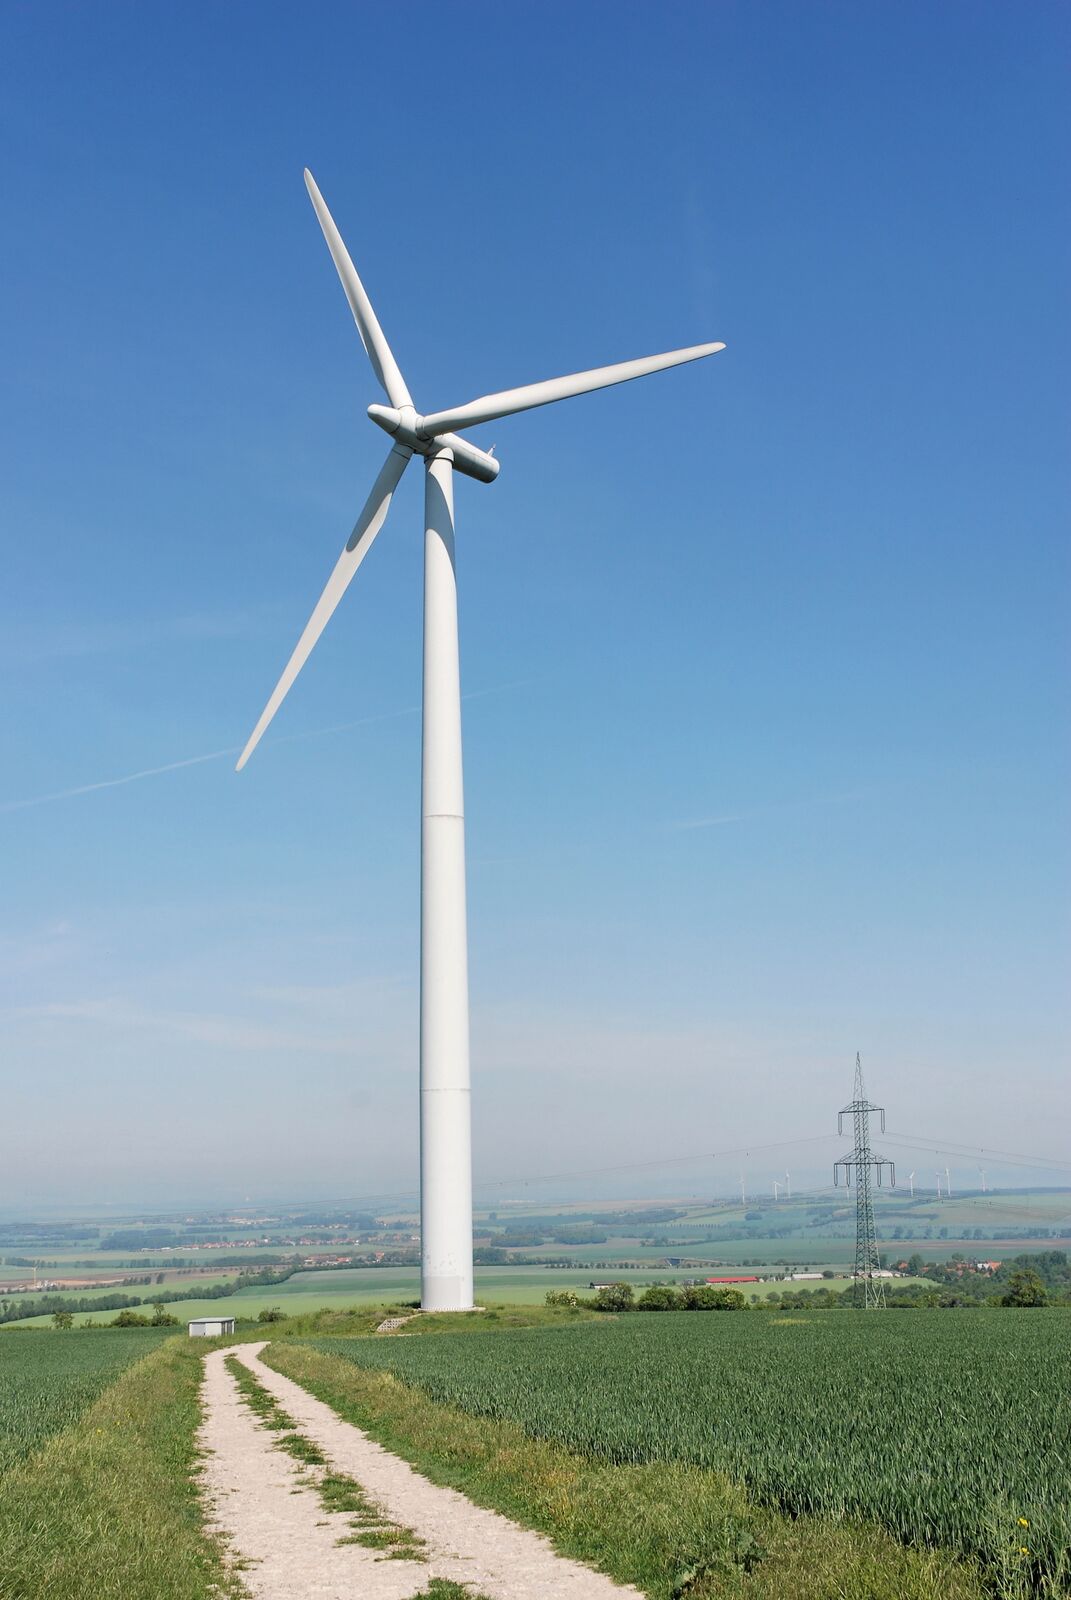 A small country path winds past a wind turbine towering above a rural panorama on a clear, sunny day